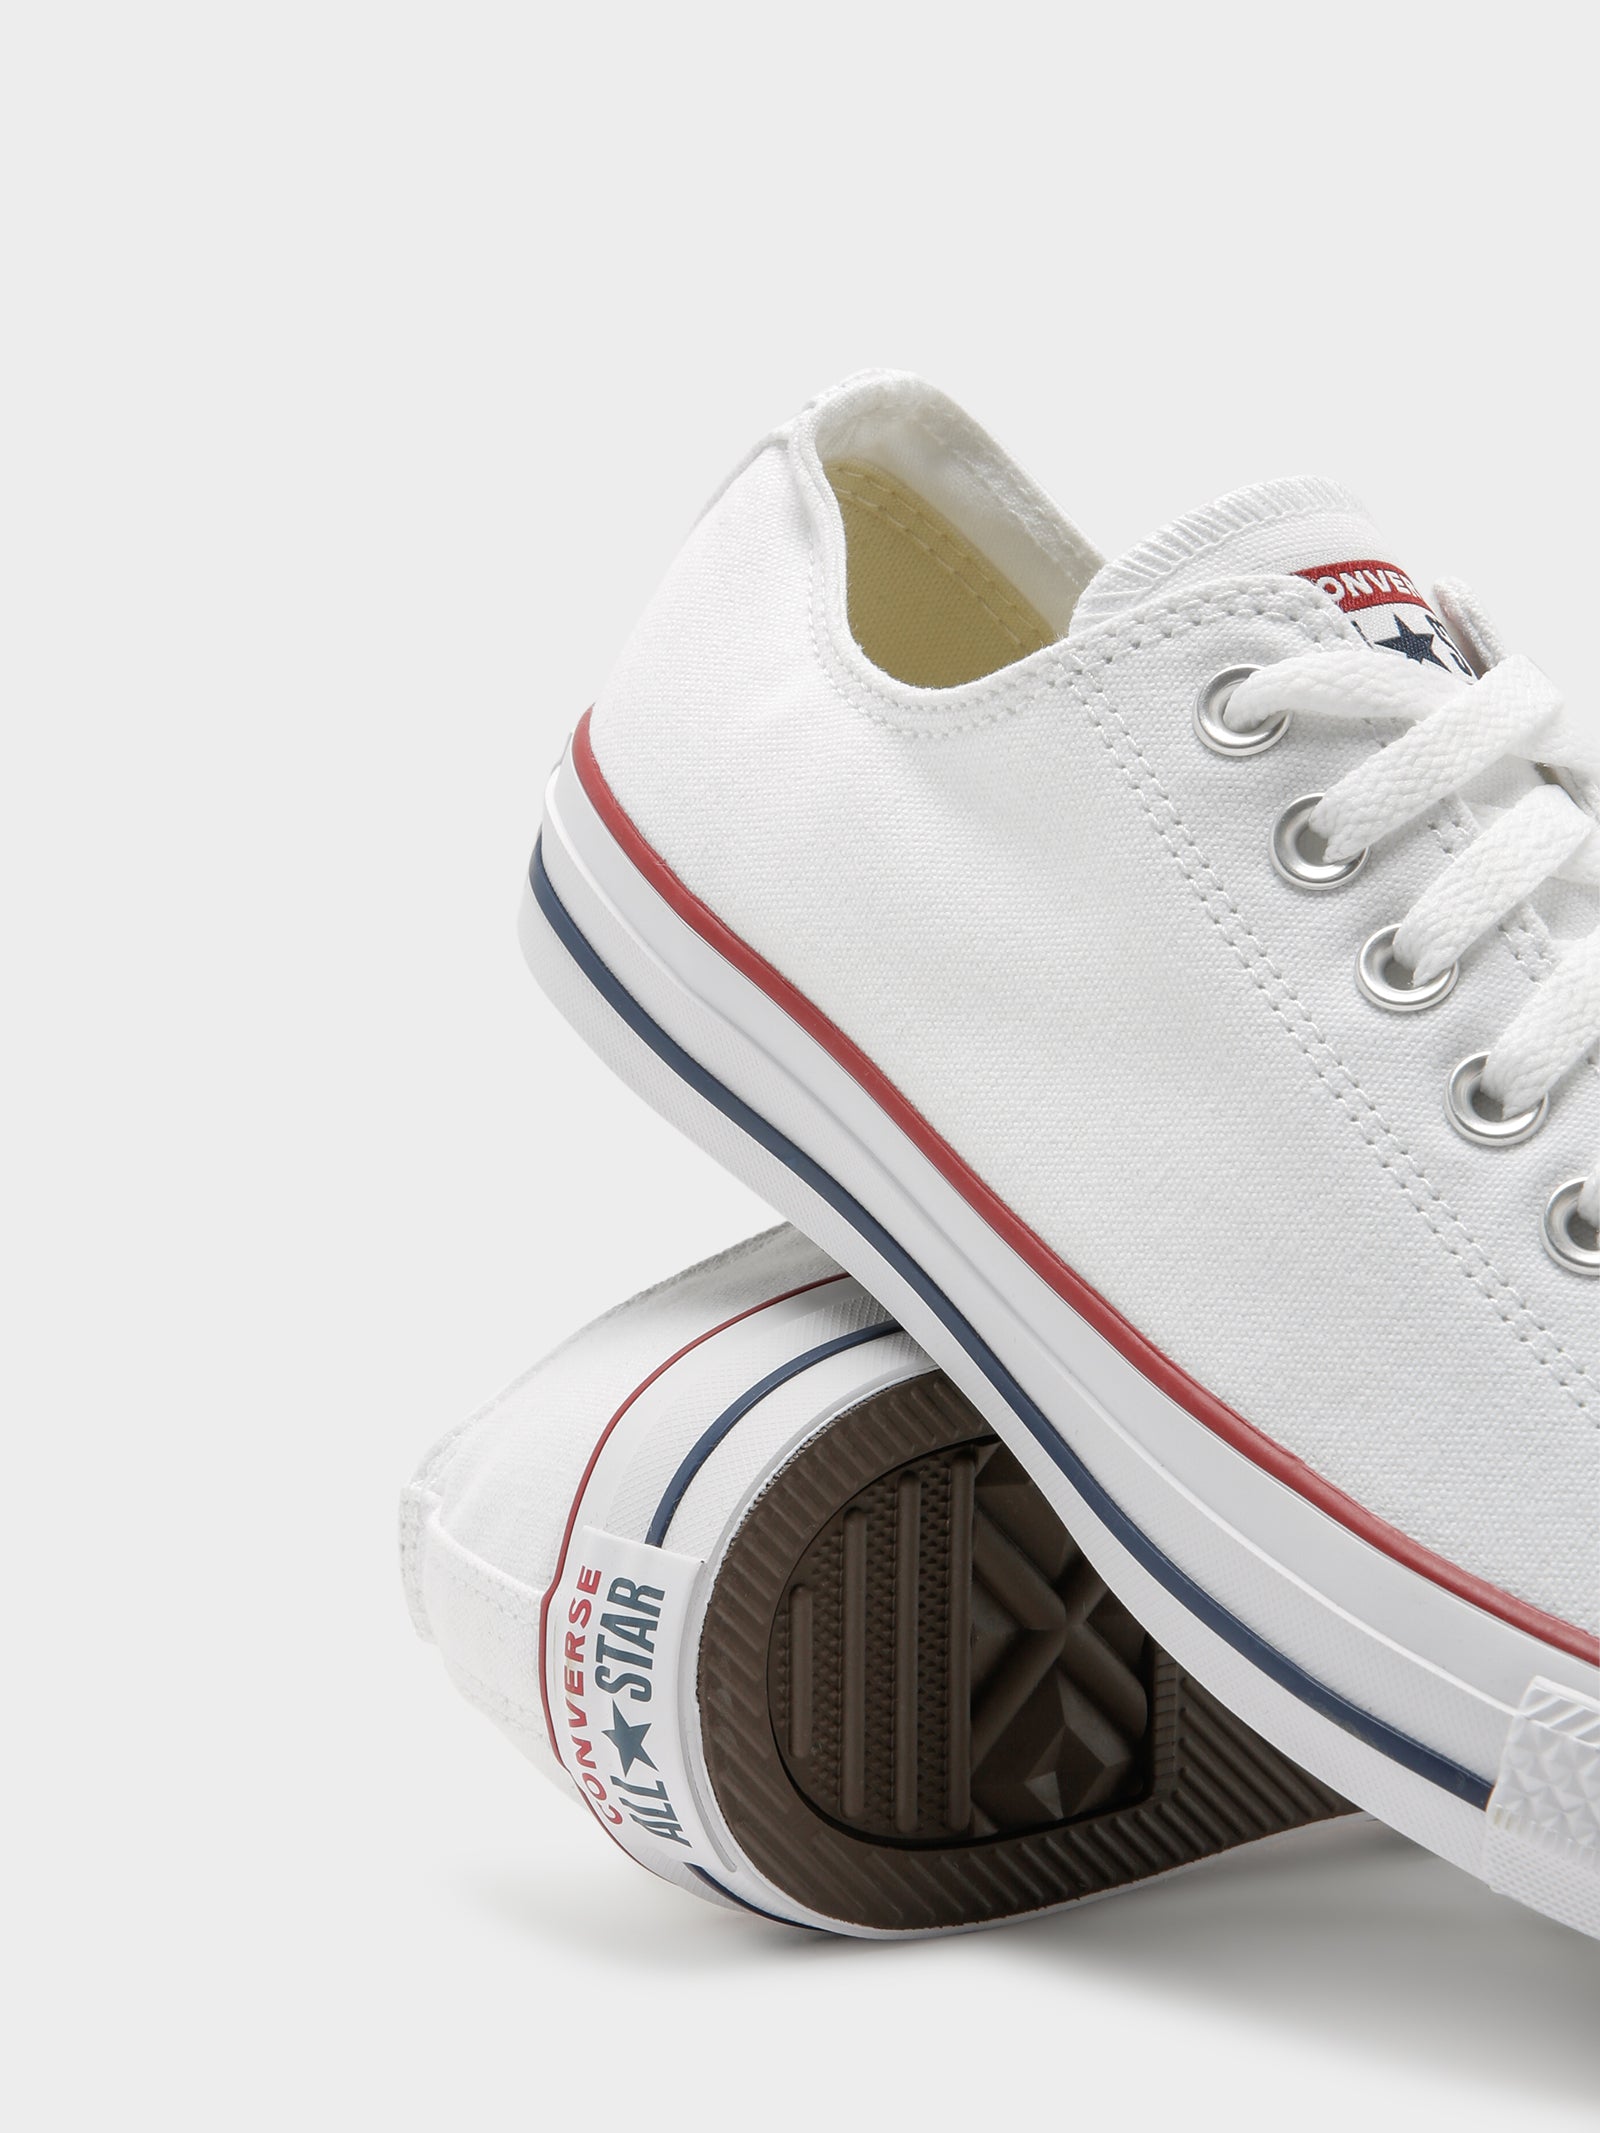 converse classic white low